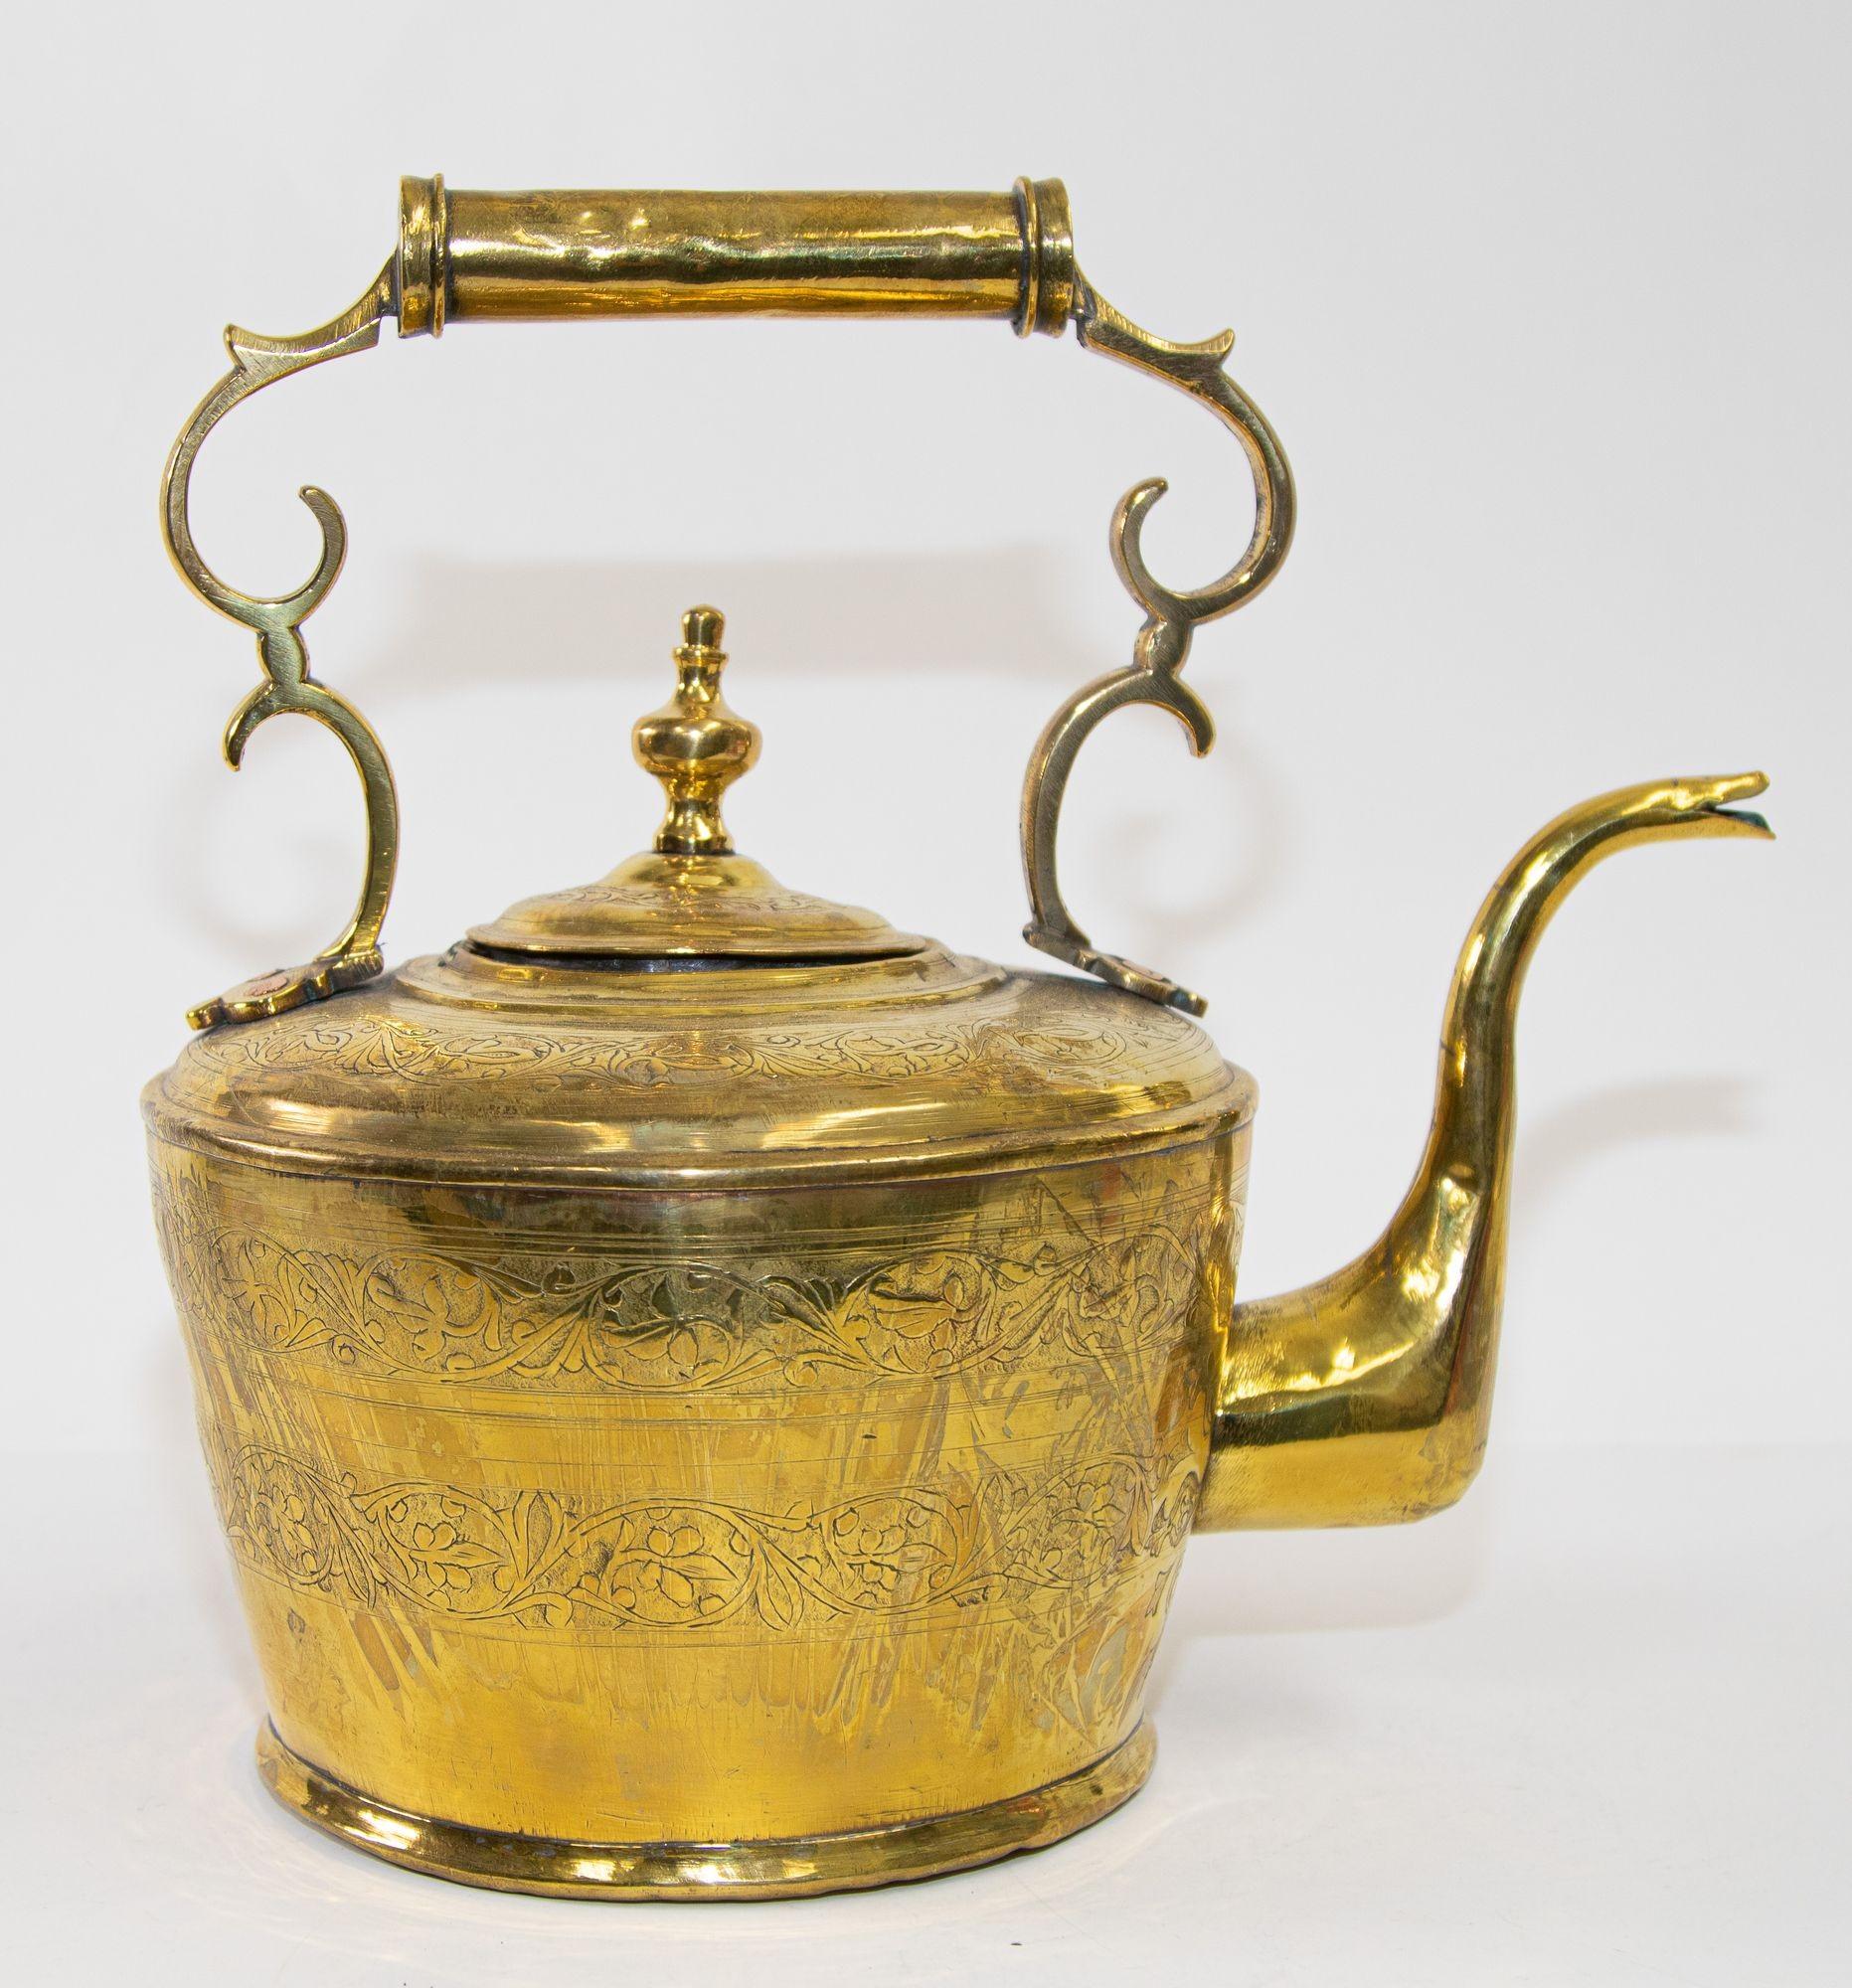 Antique Moroccan Moorish large heavy solid brass kettle embossed with brass floral design.
It is a unique piece to display in your kitchen or to add to your brass collection.
Moroccan brass tea kettle pot, museum quality, one of a kind finely and